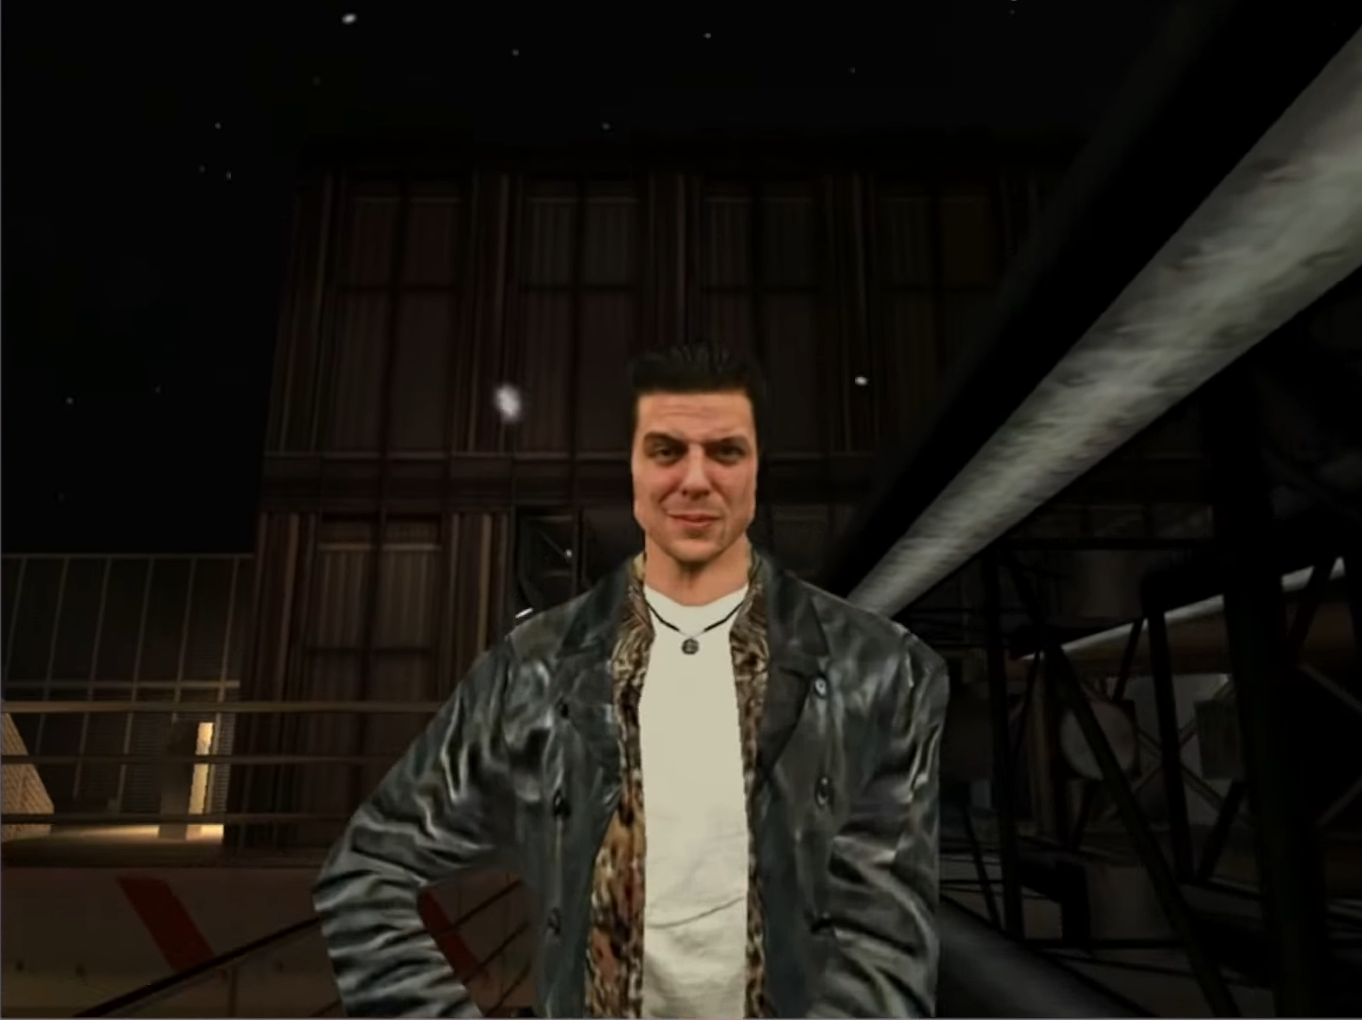 character directly depicted in the Max Payne game